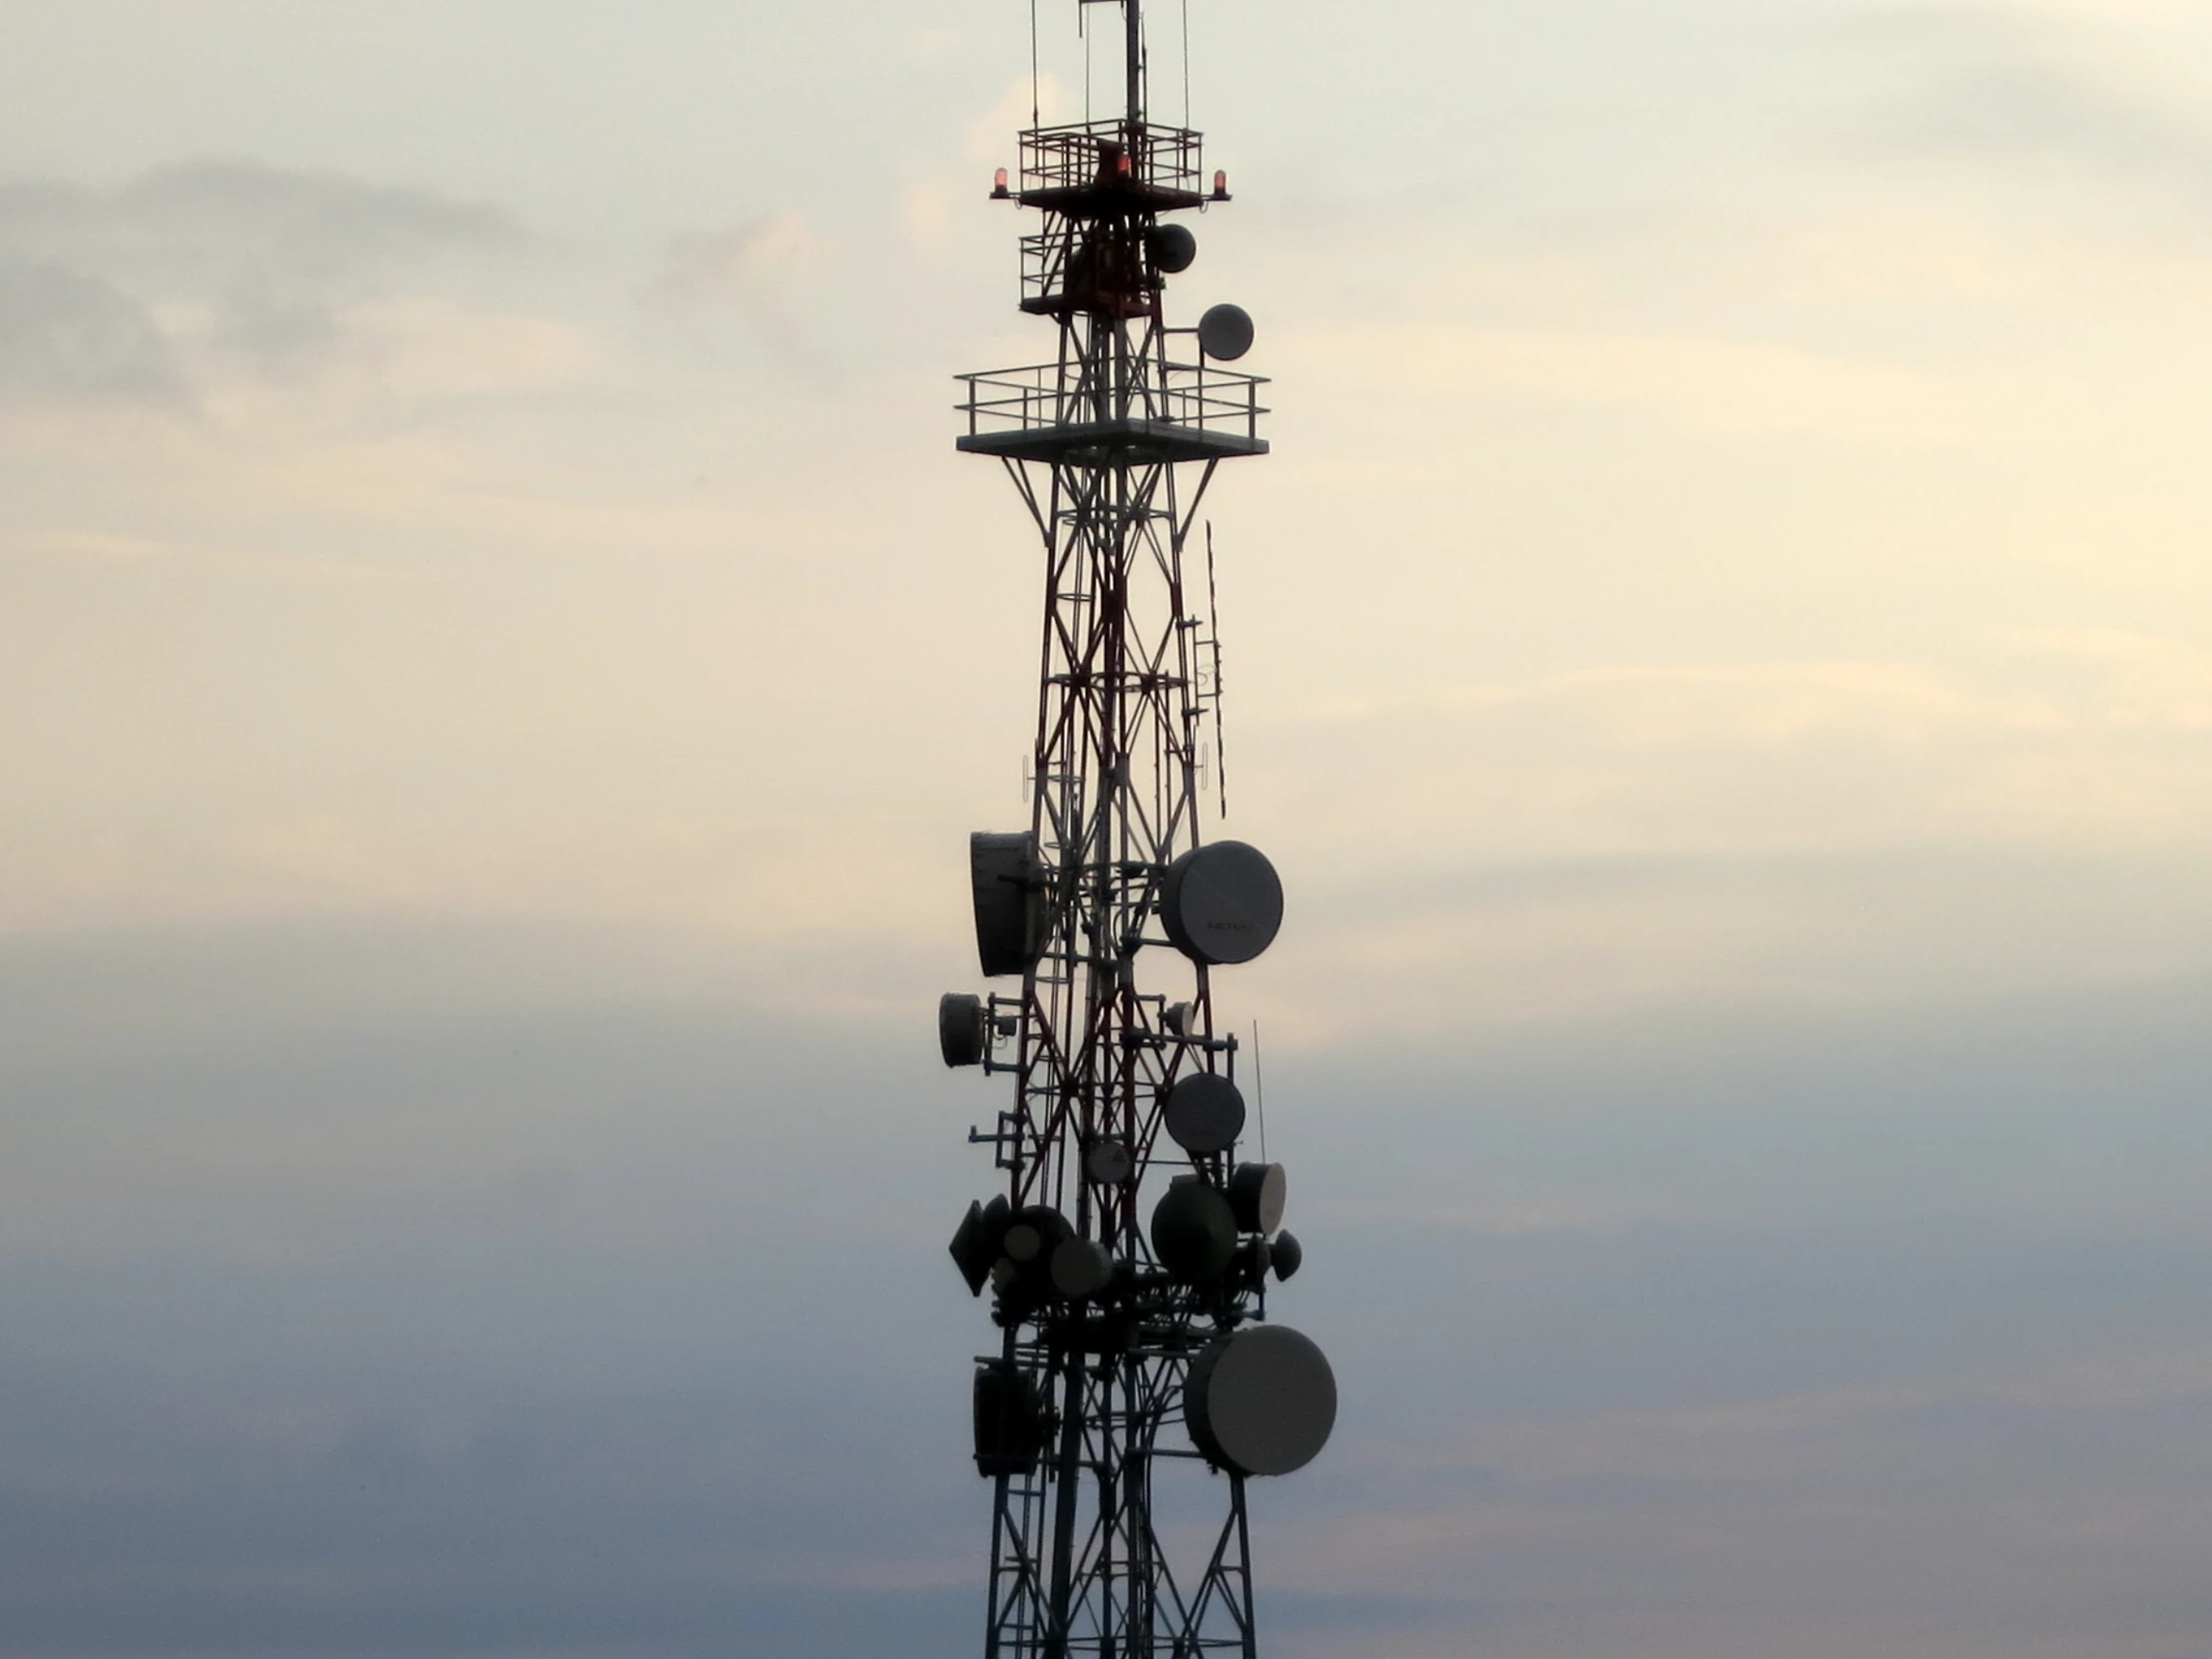 a large tower has several radio antennas on top of it